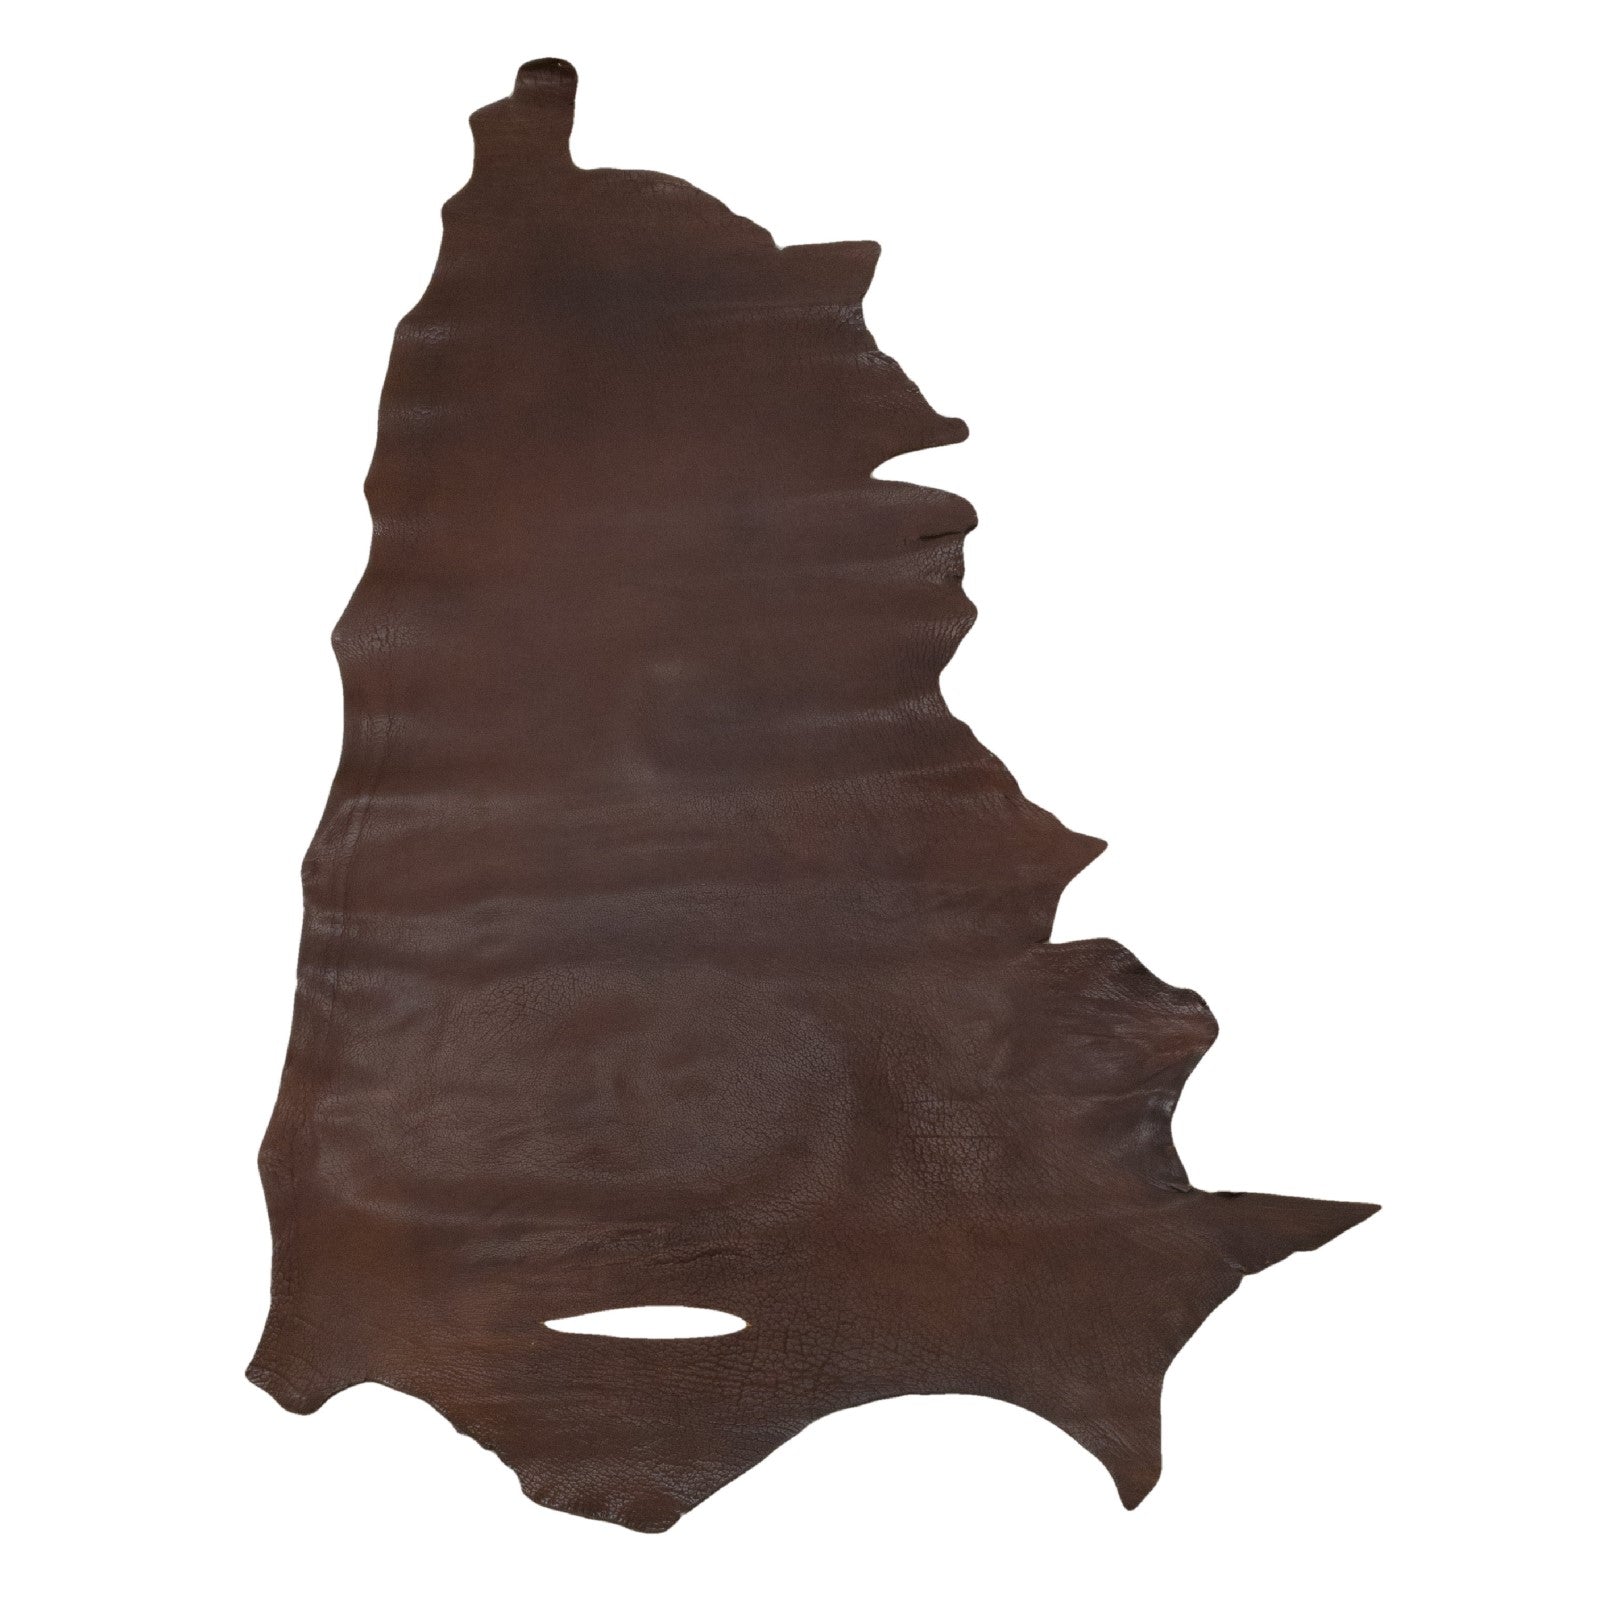 Free Roam Brown, 5-6 oz, 12-23 SqFt, Bison Sides, 18-20 Sq Ft | The Leather Guy